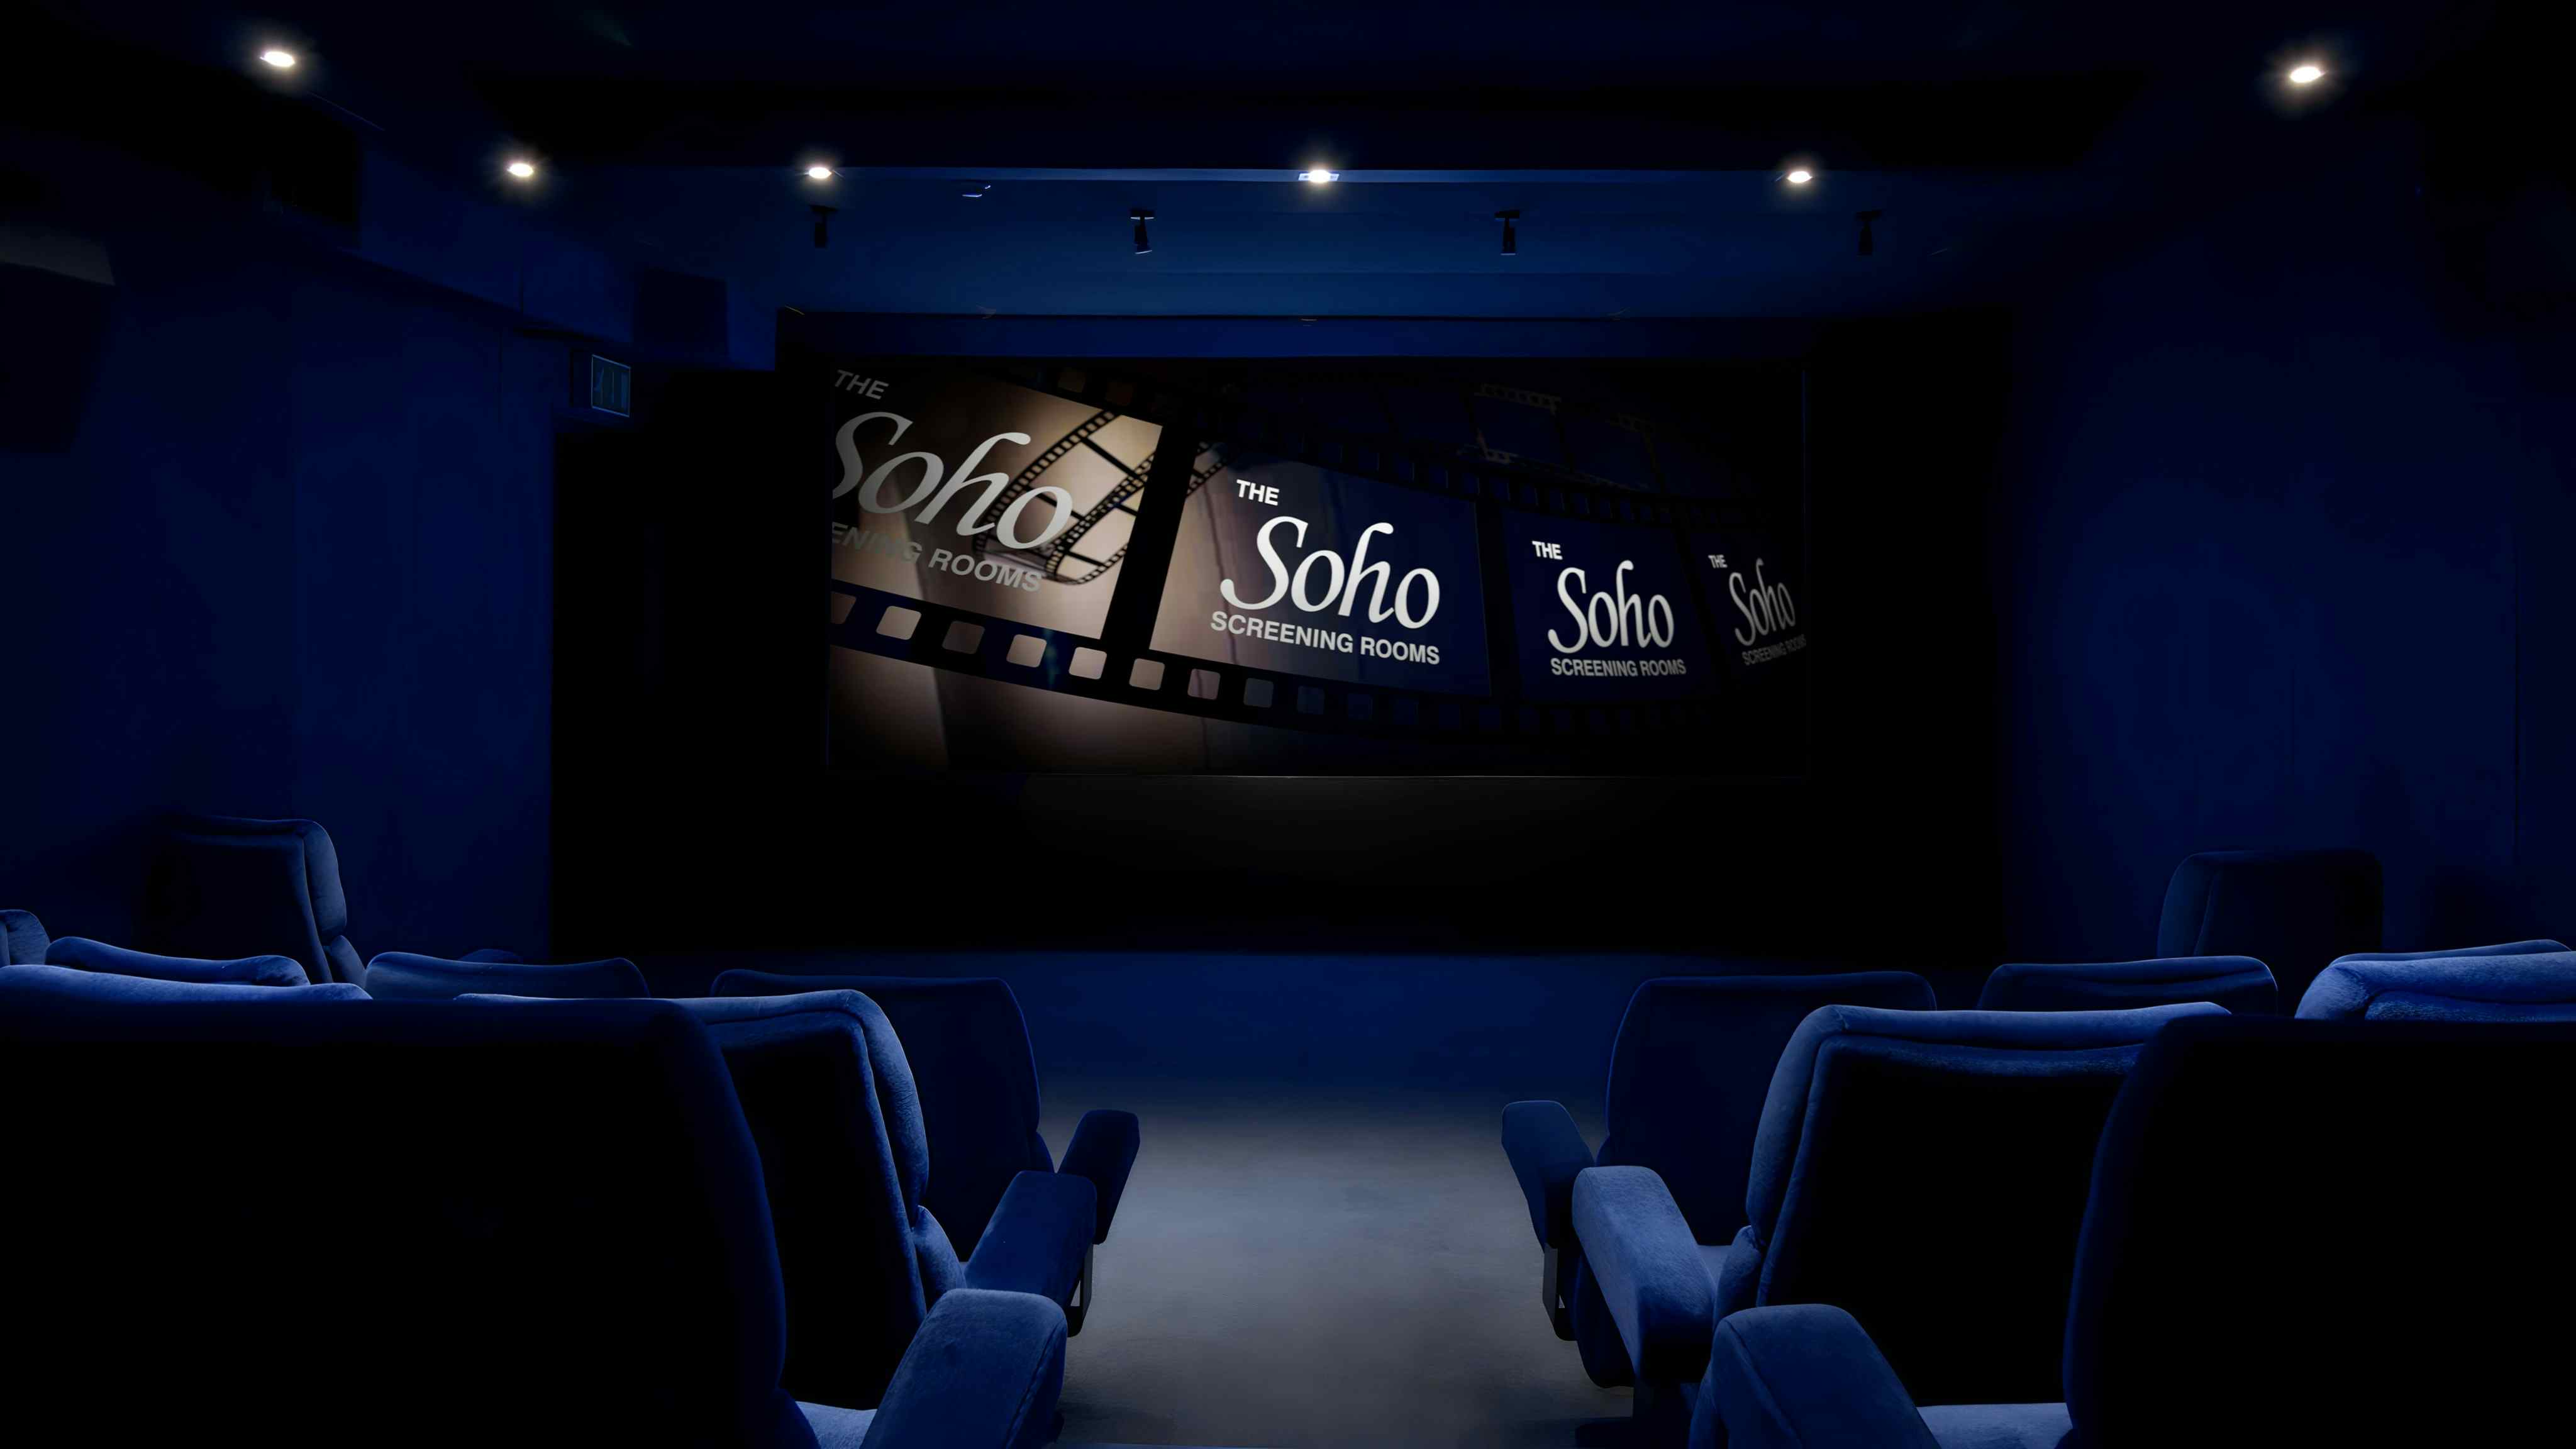 Group Bookings / Birthdays / Celebration / Hen Parties at The Soho Screening Rooms, The Soho Screening Rooms